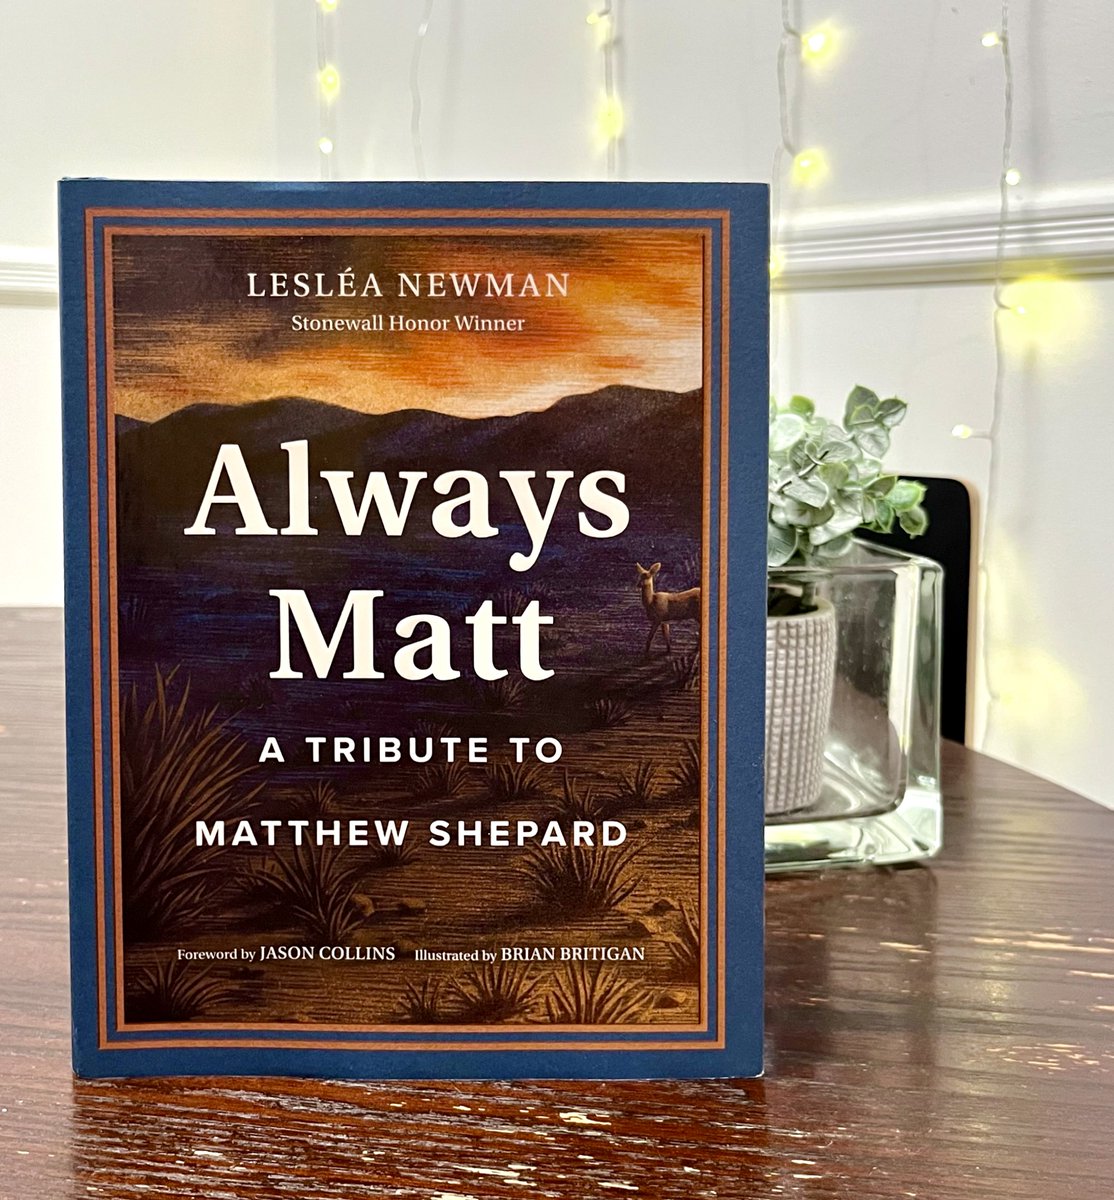 ALWAYS MATT by @lesleanewman is a poignant tribute to the life of Matthew Shepard. Today, we commemorate his 47th birthday and honor 25 years of his legacy in the fight for LGBTQ+ rights with the formation of @mattshepardfdn. bit.ly/alwaysmatt